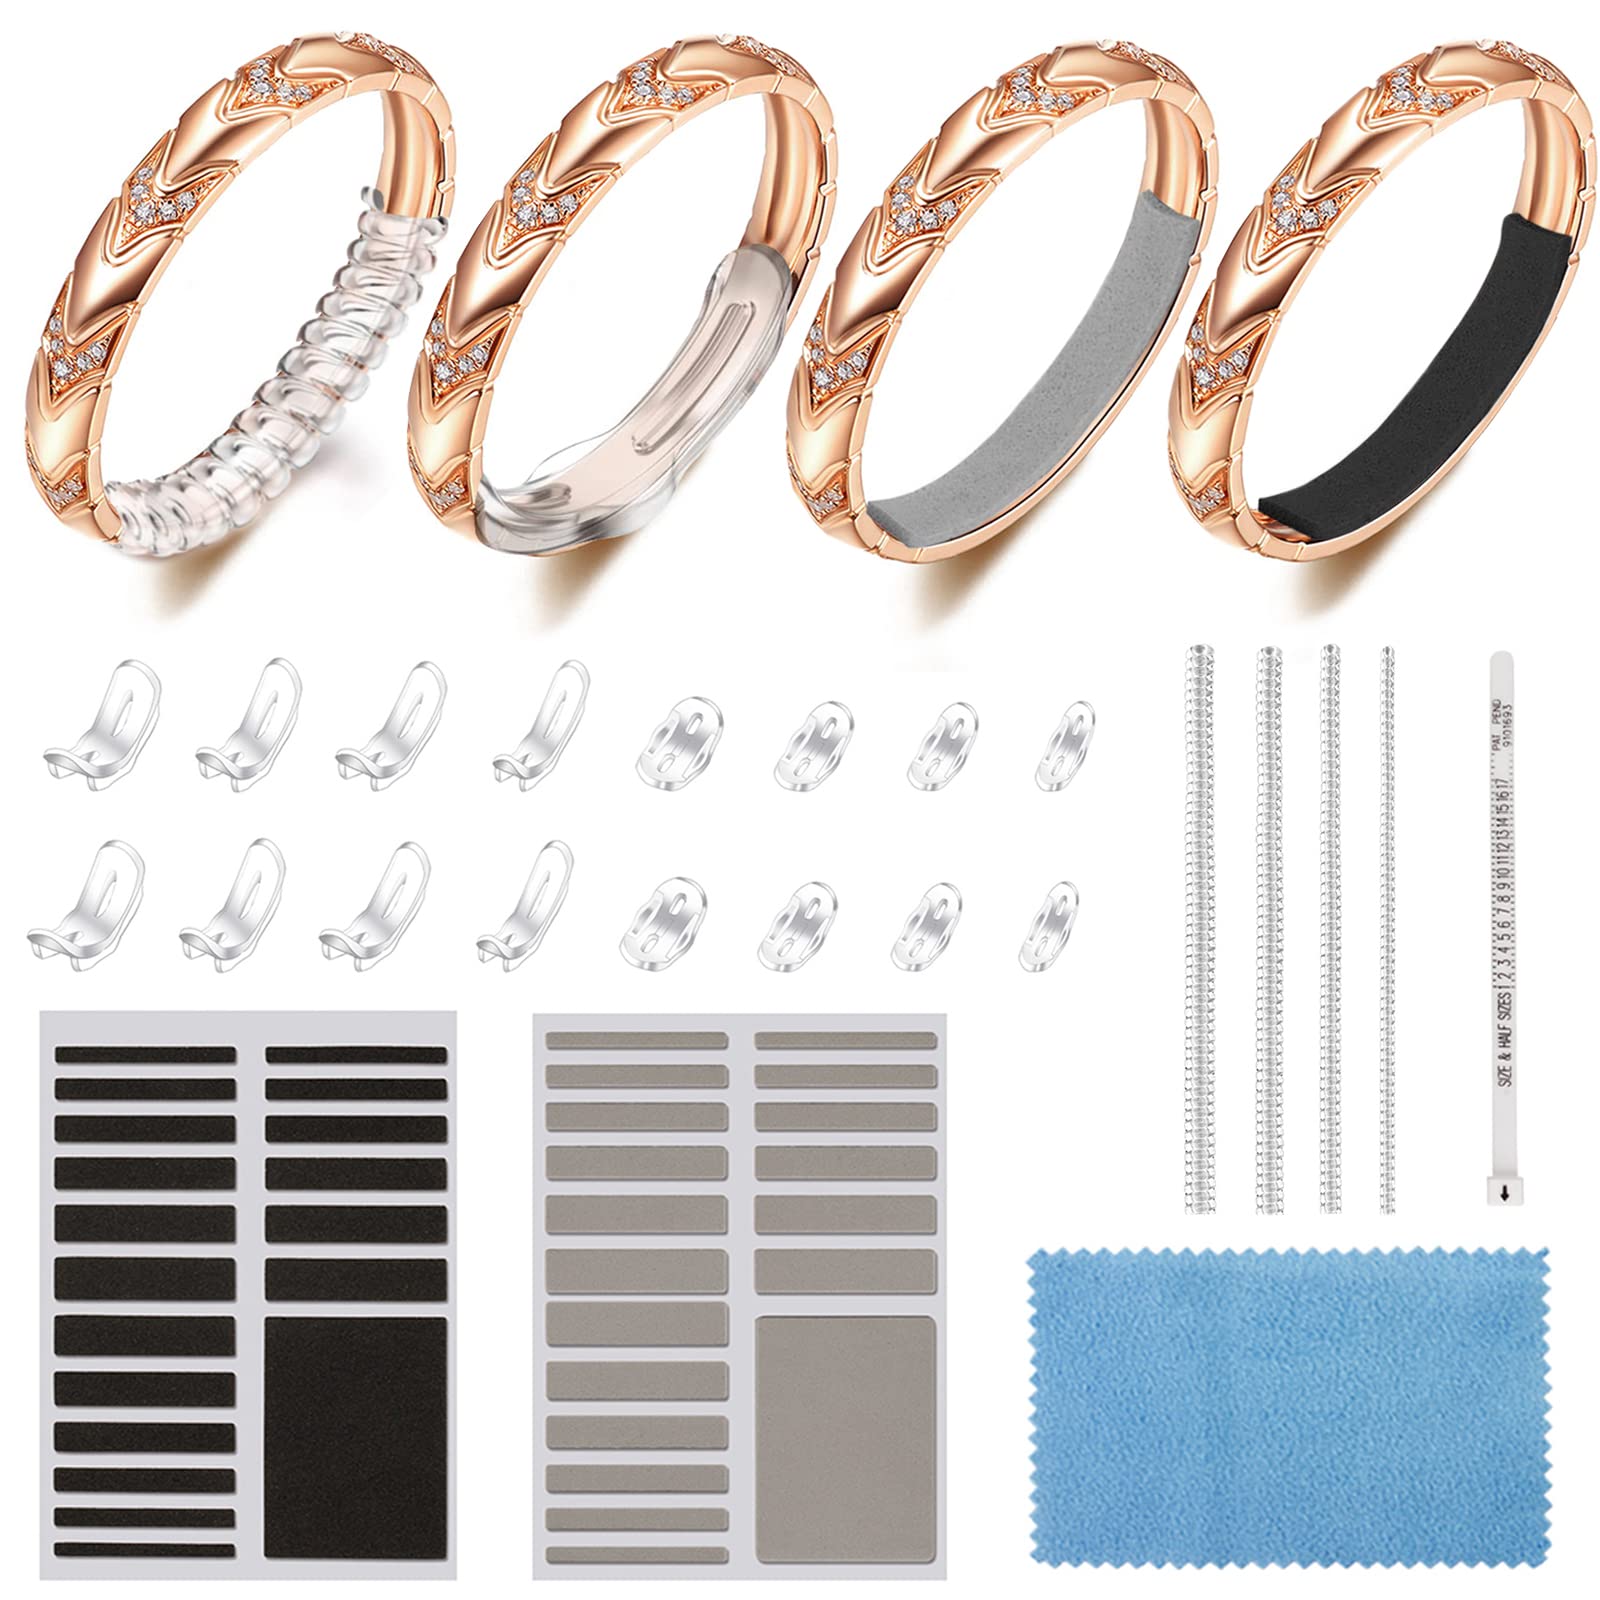 Eiito Ring Size Adjuster for Loose Rings, Rings Sizers for Rings